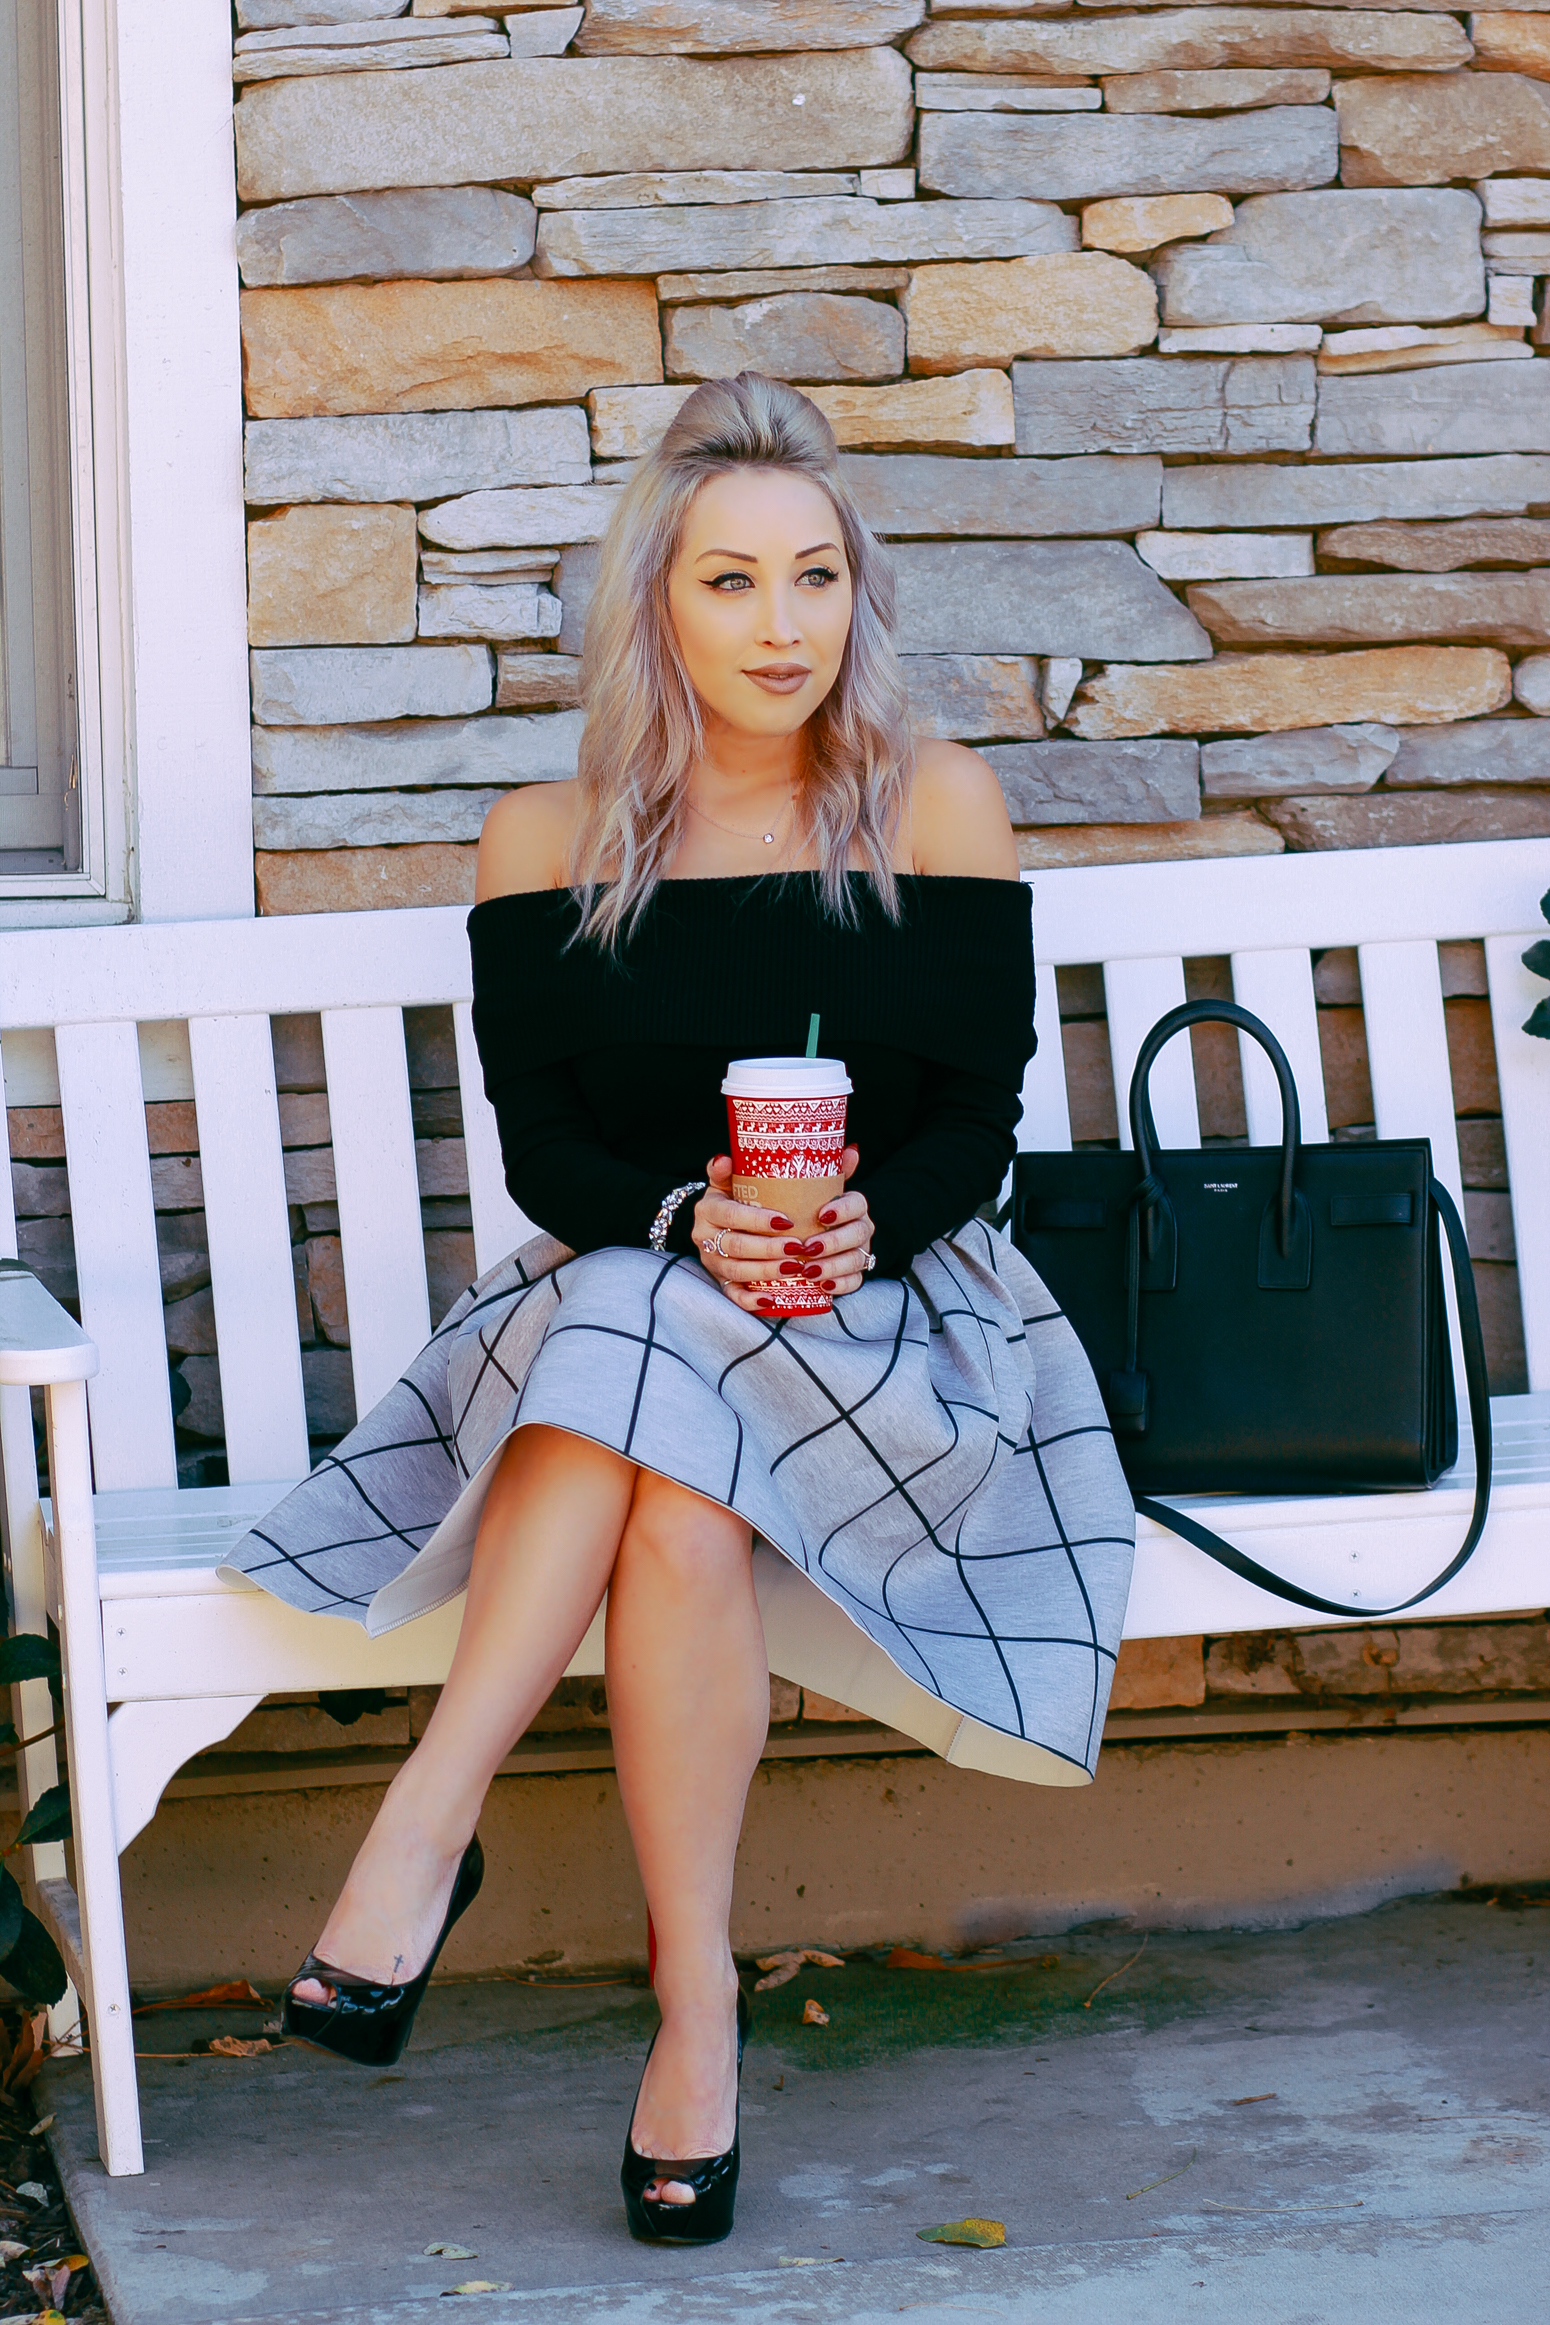 Blondie in the City | IG: @HayleyLarue | Grid Print Holiday Skirt | Holiday Outfit Inspiration